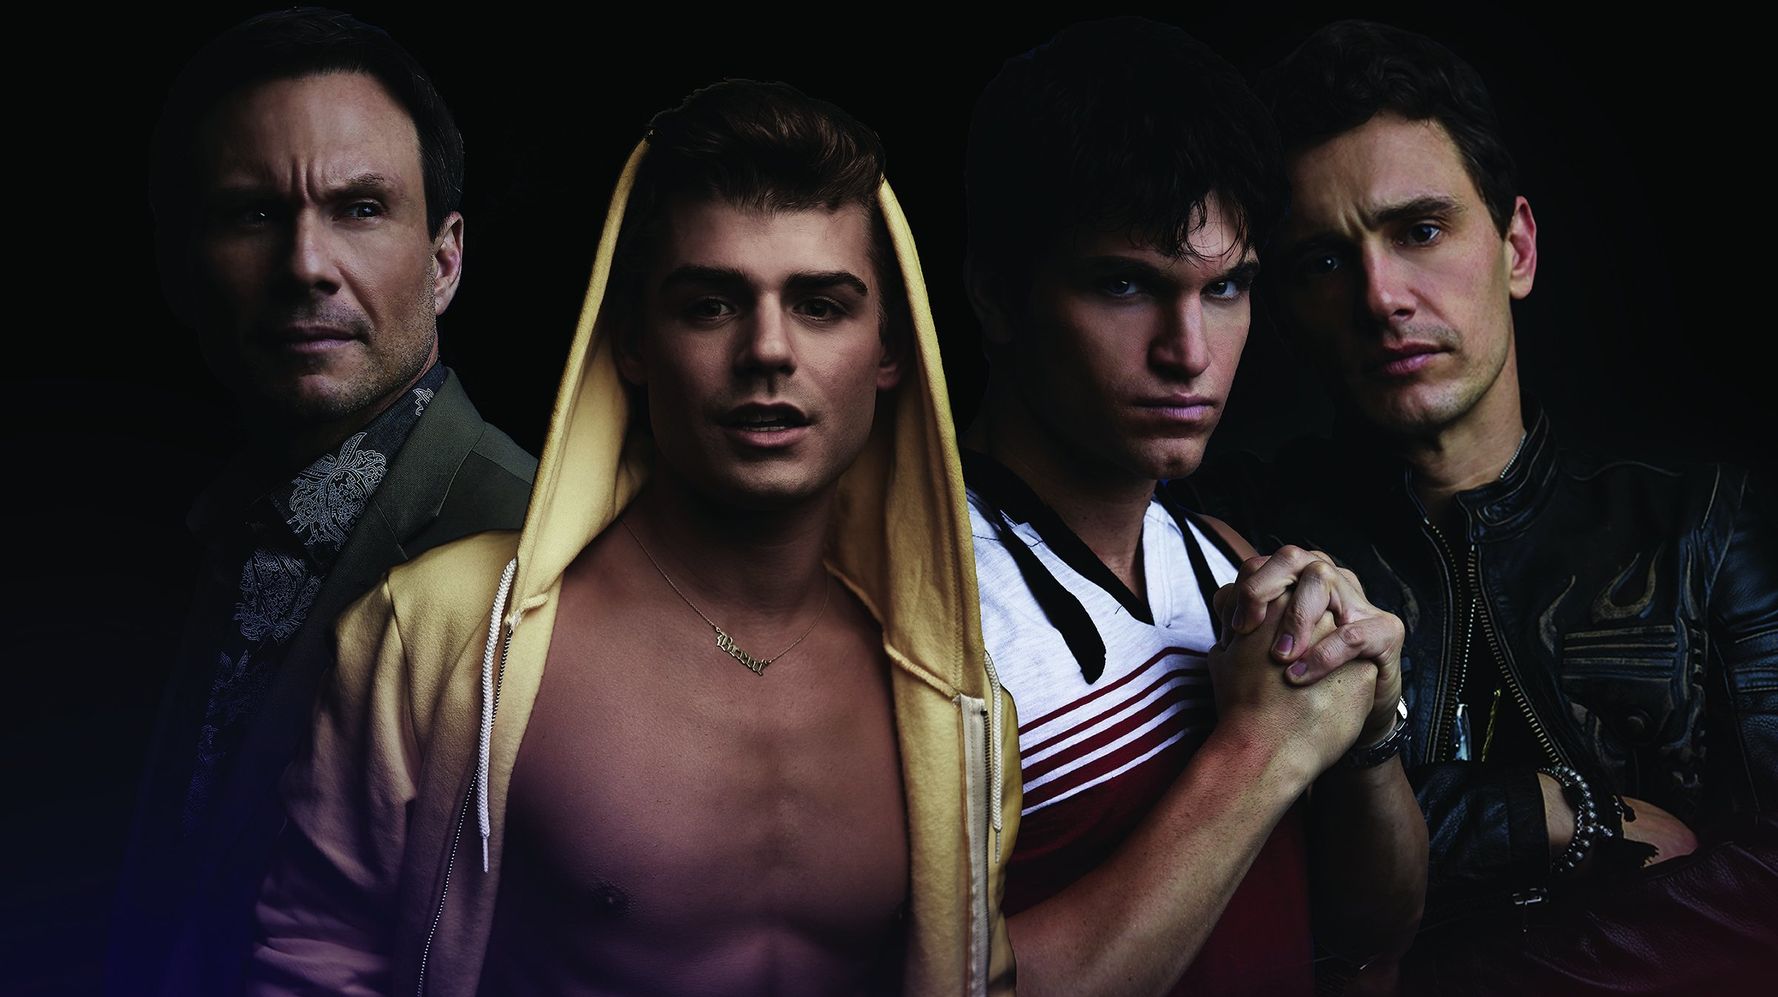 Gay Porn, Murder And James Franco's Druthers: How 'King Cobra' Came To  Headline Tribeca | HuffPost Entertainment